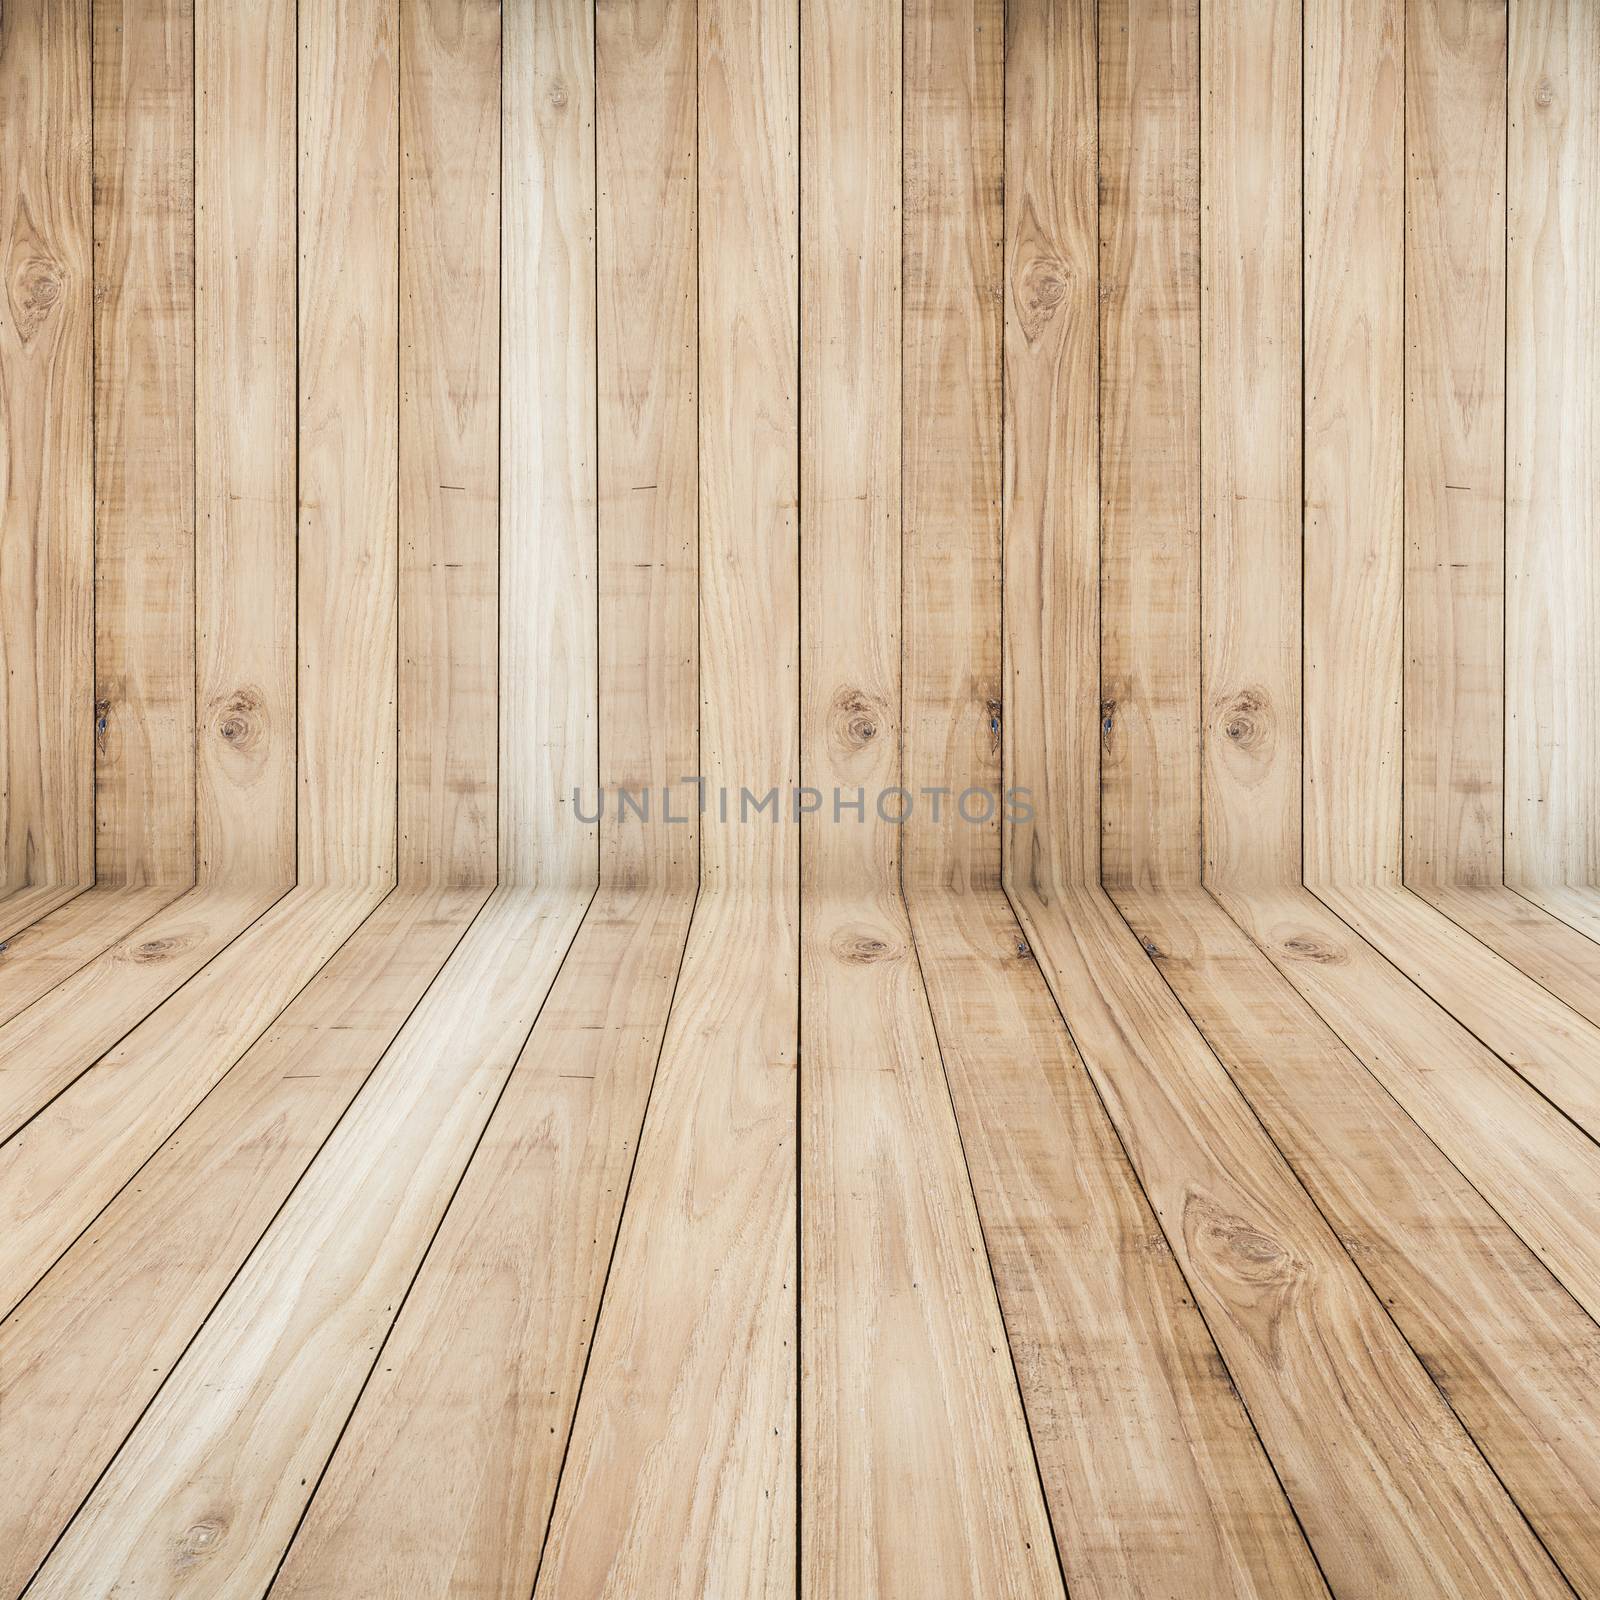 Big brown floors wood planks texture background wallpaper. Stand by 2nix